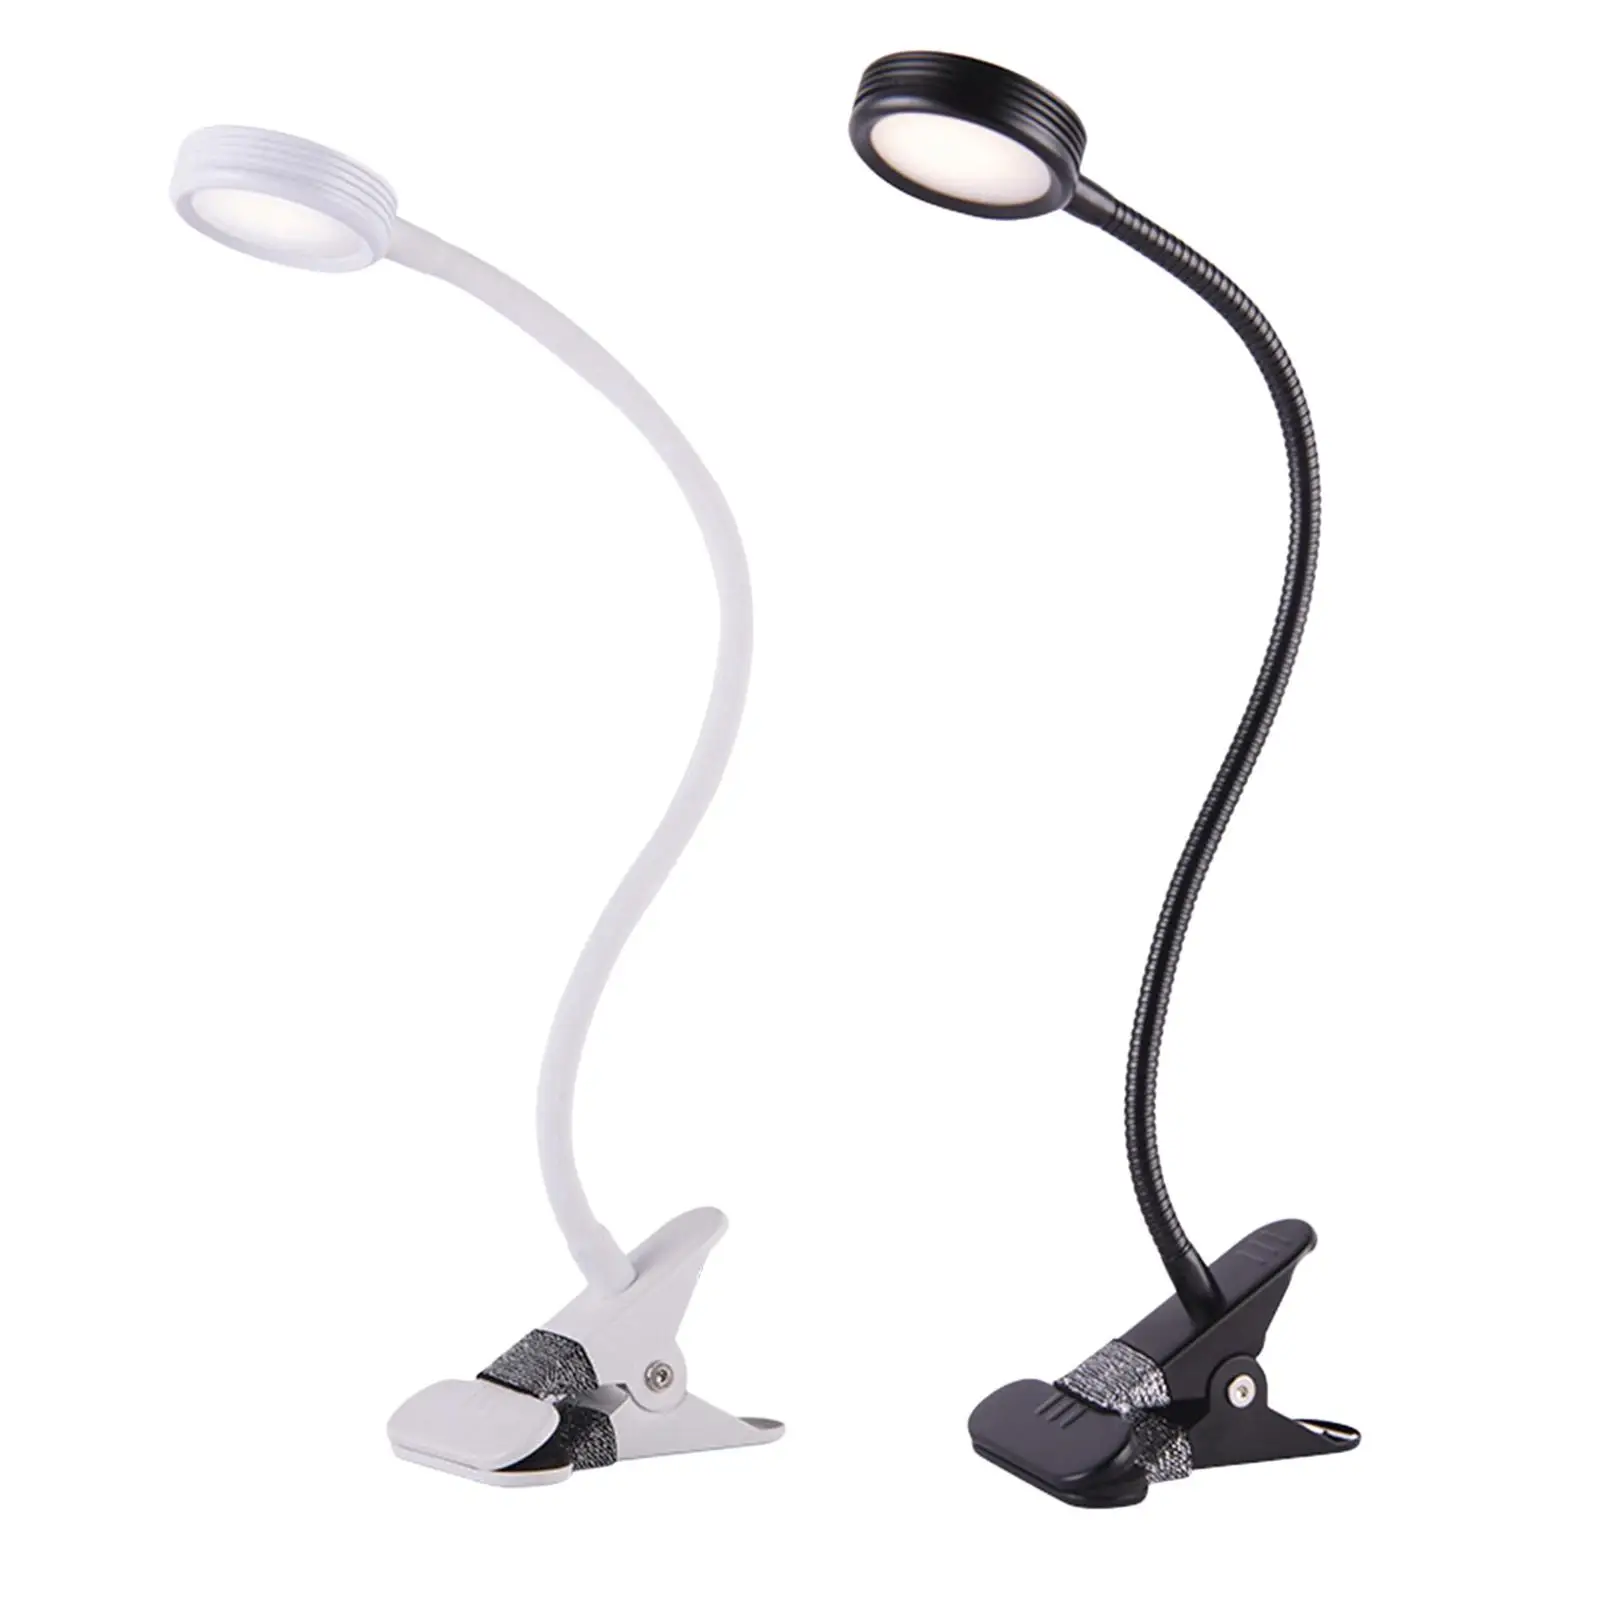 Mini Clip on Light Adjustable USB 2 Level Dimmable for Book Reading Sewing